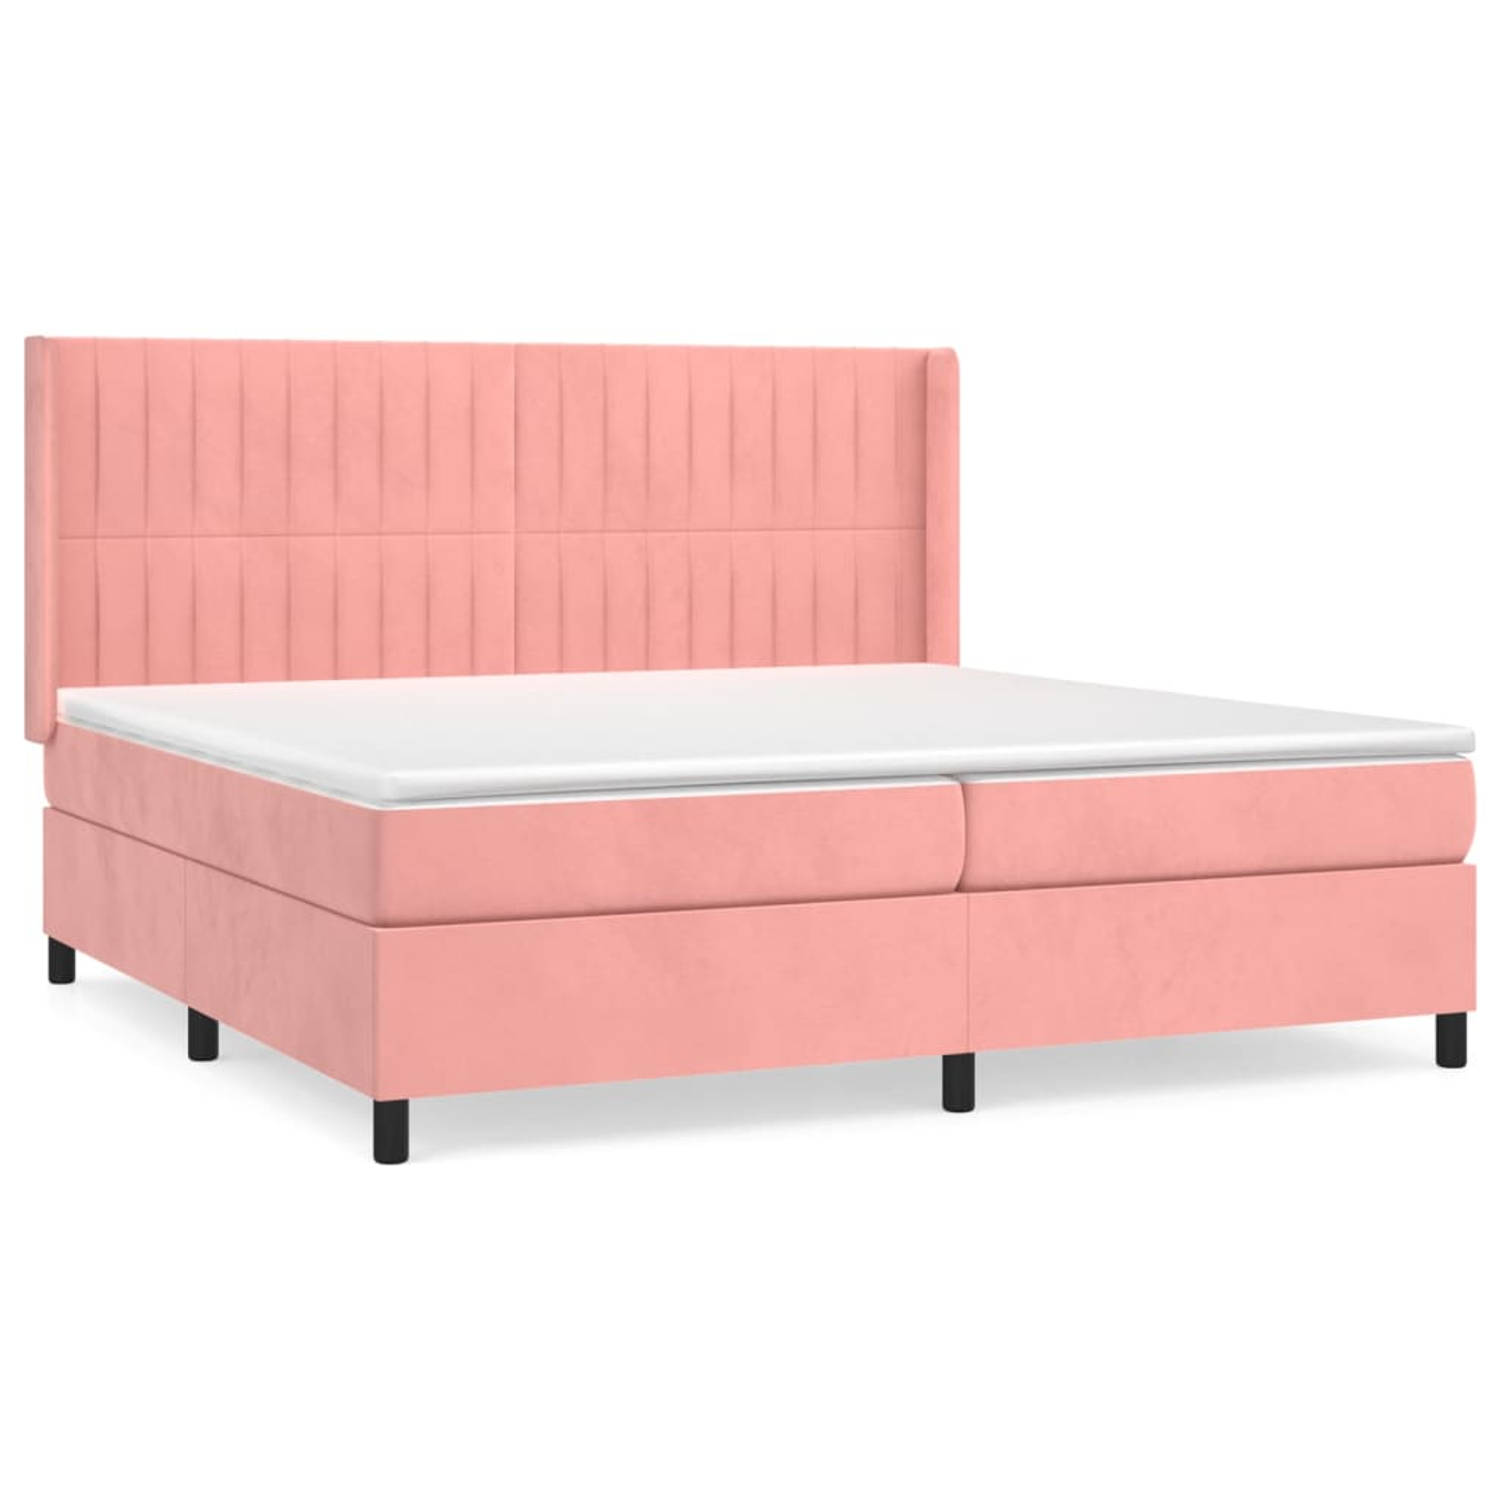 The Living Store Boxspringbed - Bed - 203 x 203 x 118/128 cm - Fluweel - Roze